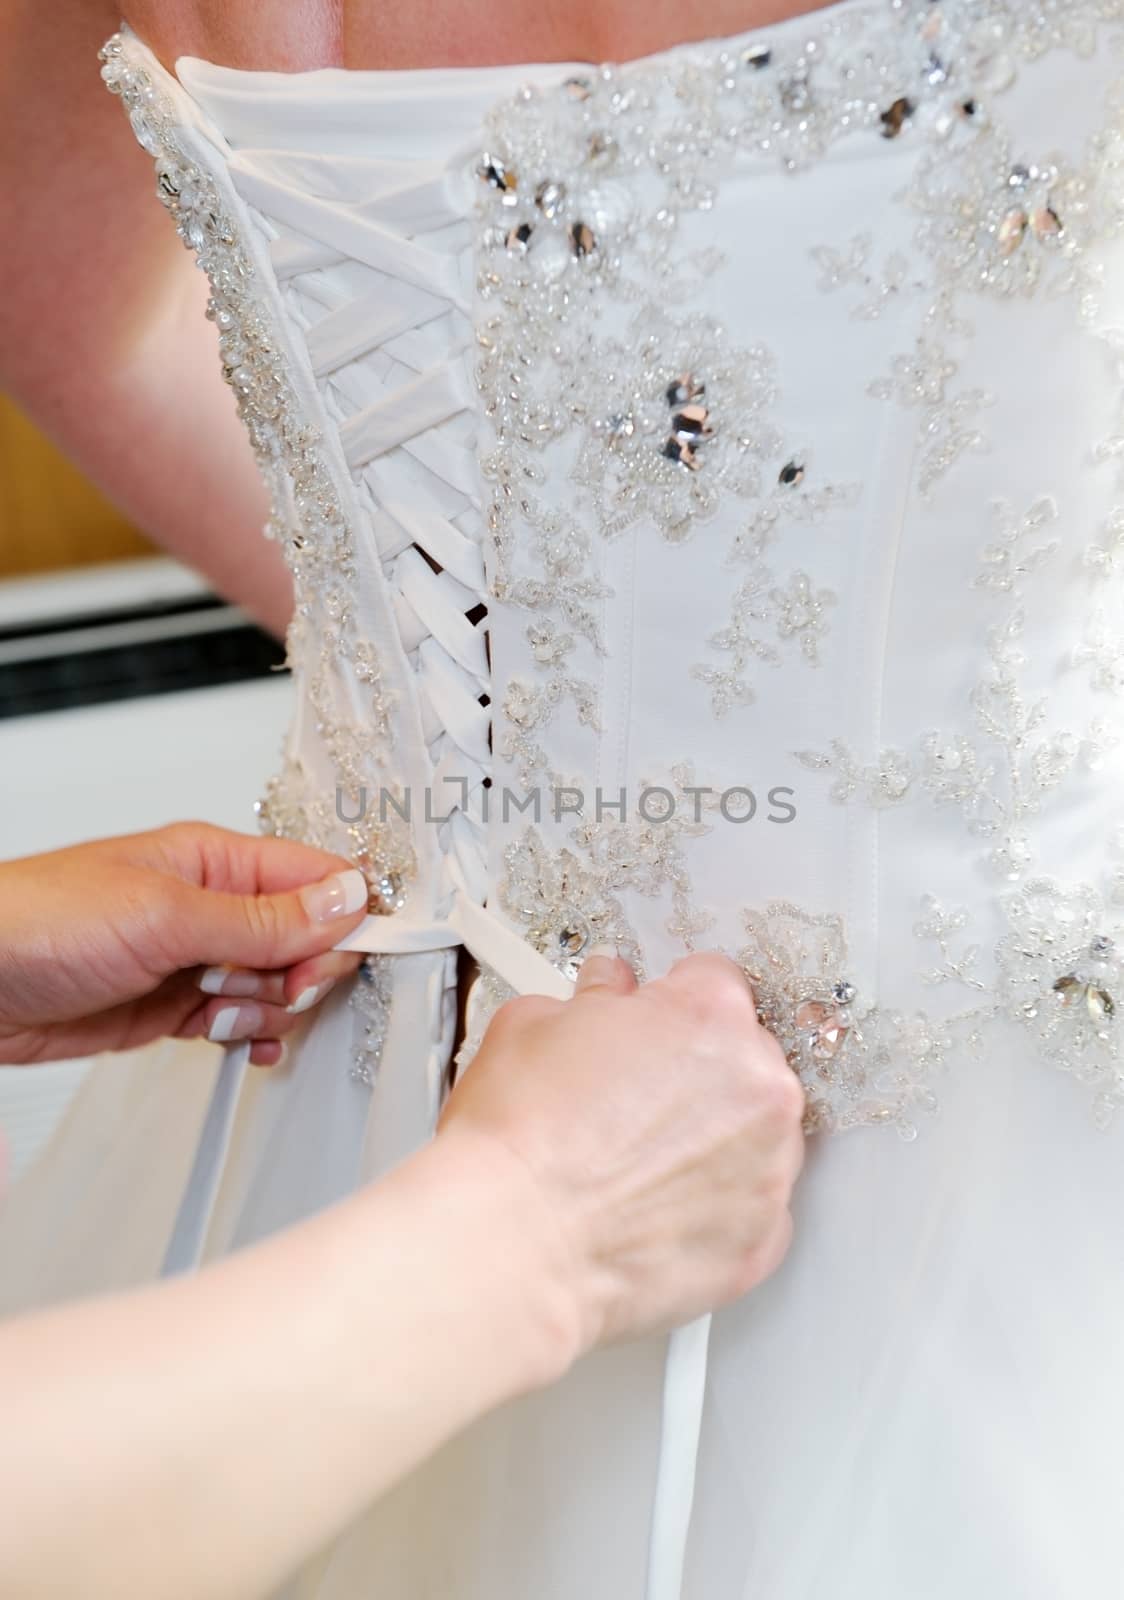 Brides dress being fastened up on wedding day